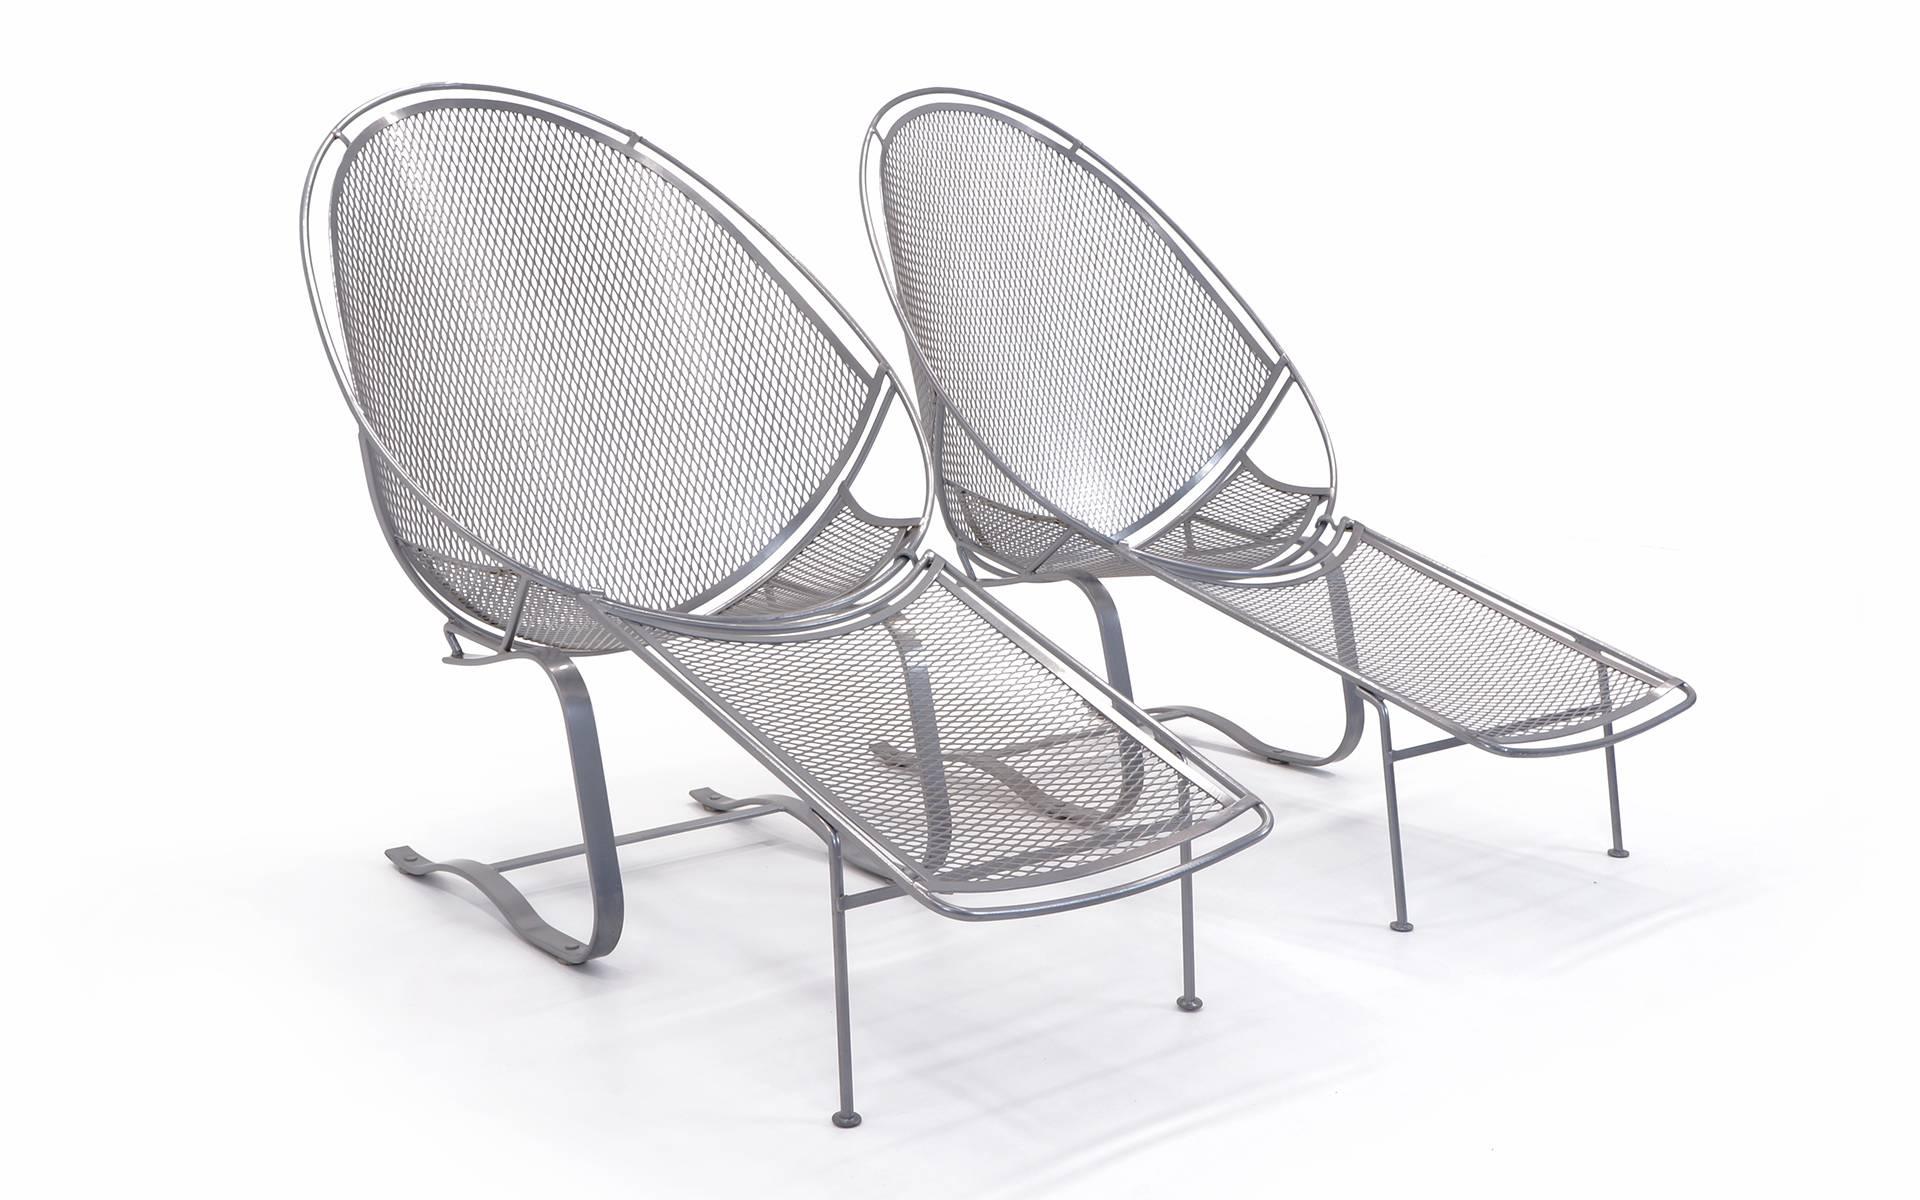 Outdoor / pool high back lounge chairs on Springer base, with removable footrests / ottomans, designed for John Salterini Company, Brooklyn NY, 1965. These were professionally powder coated two seasons ago in a satin silver color. They still look